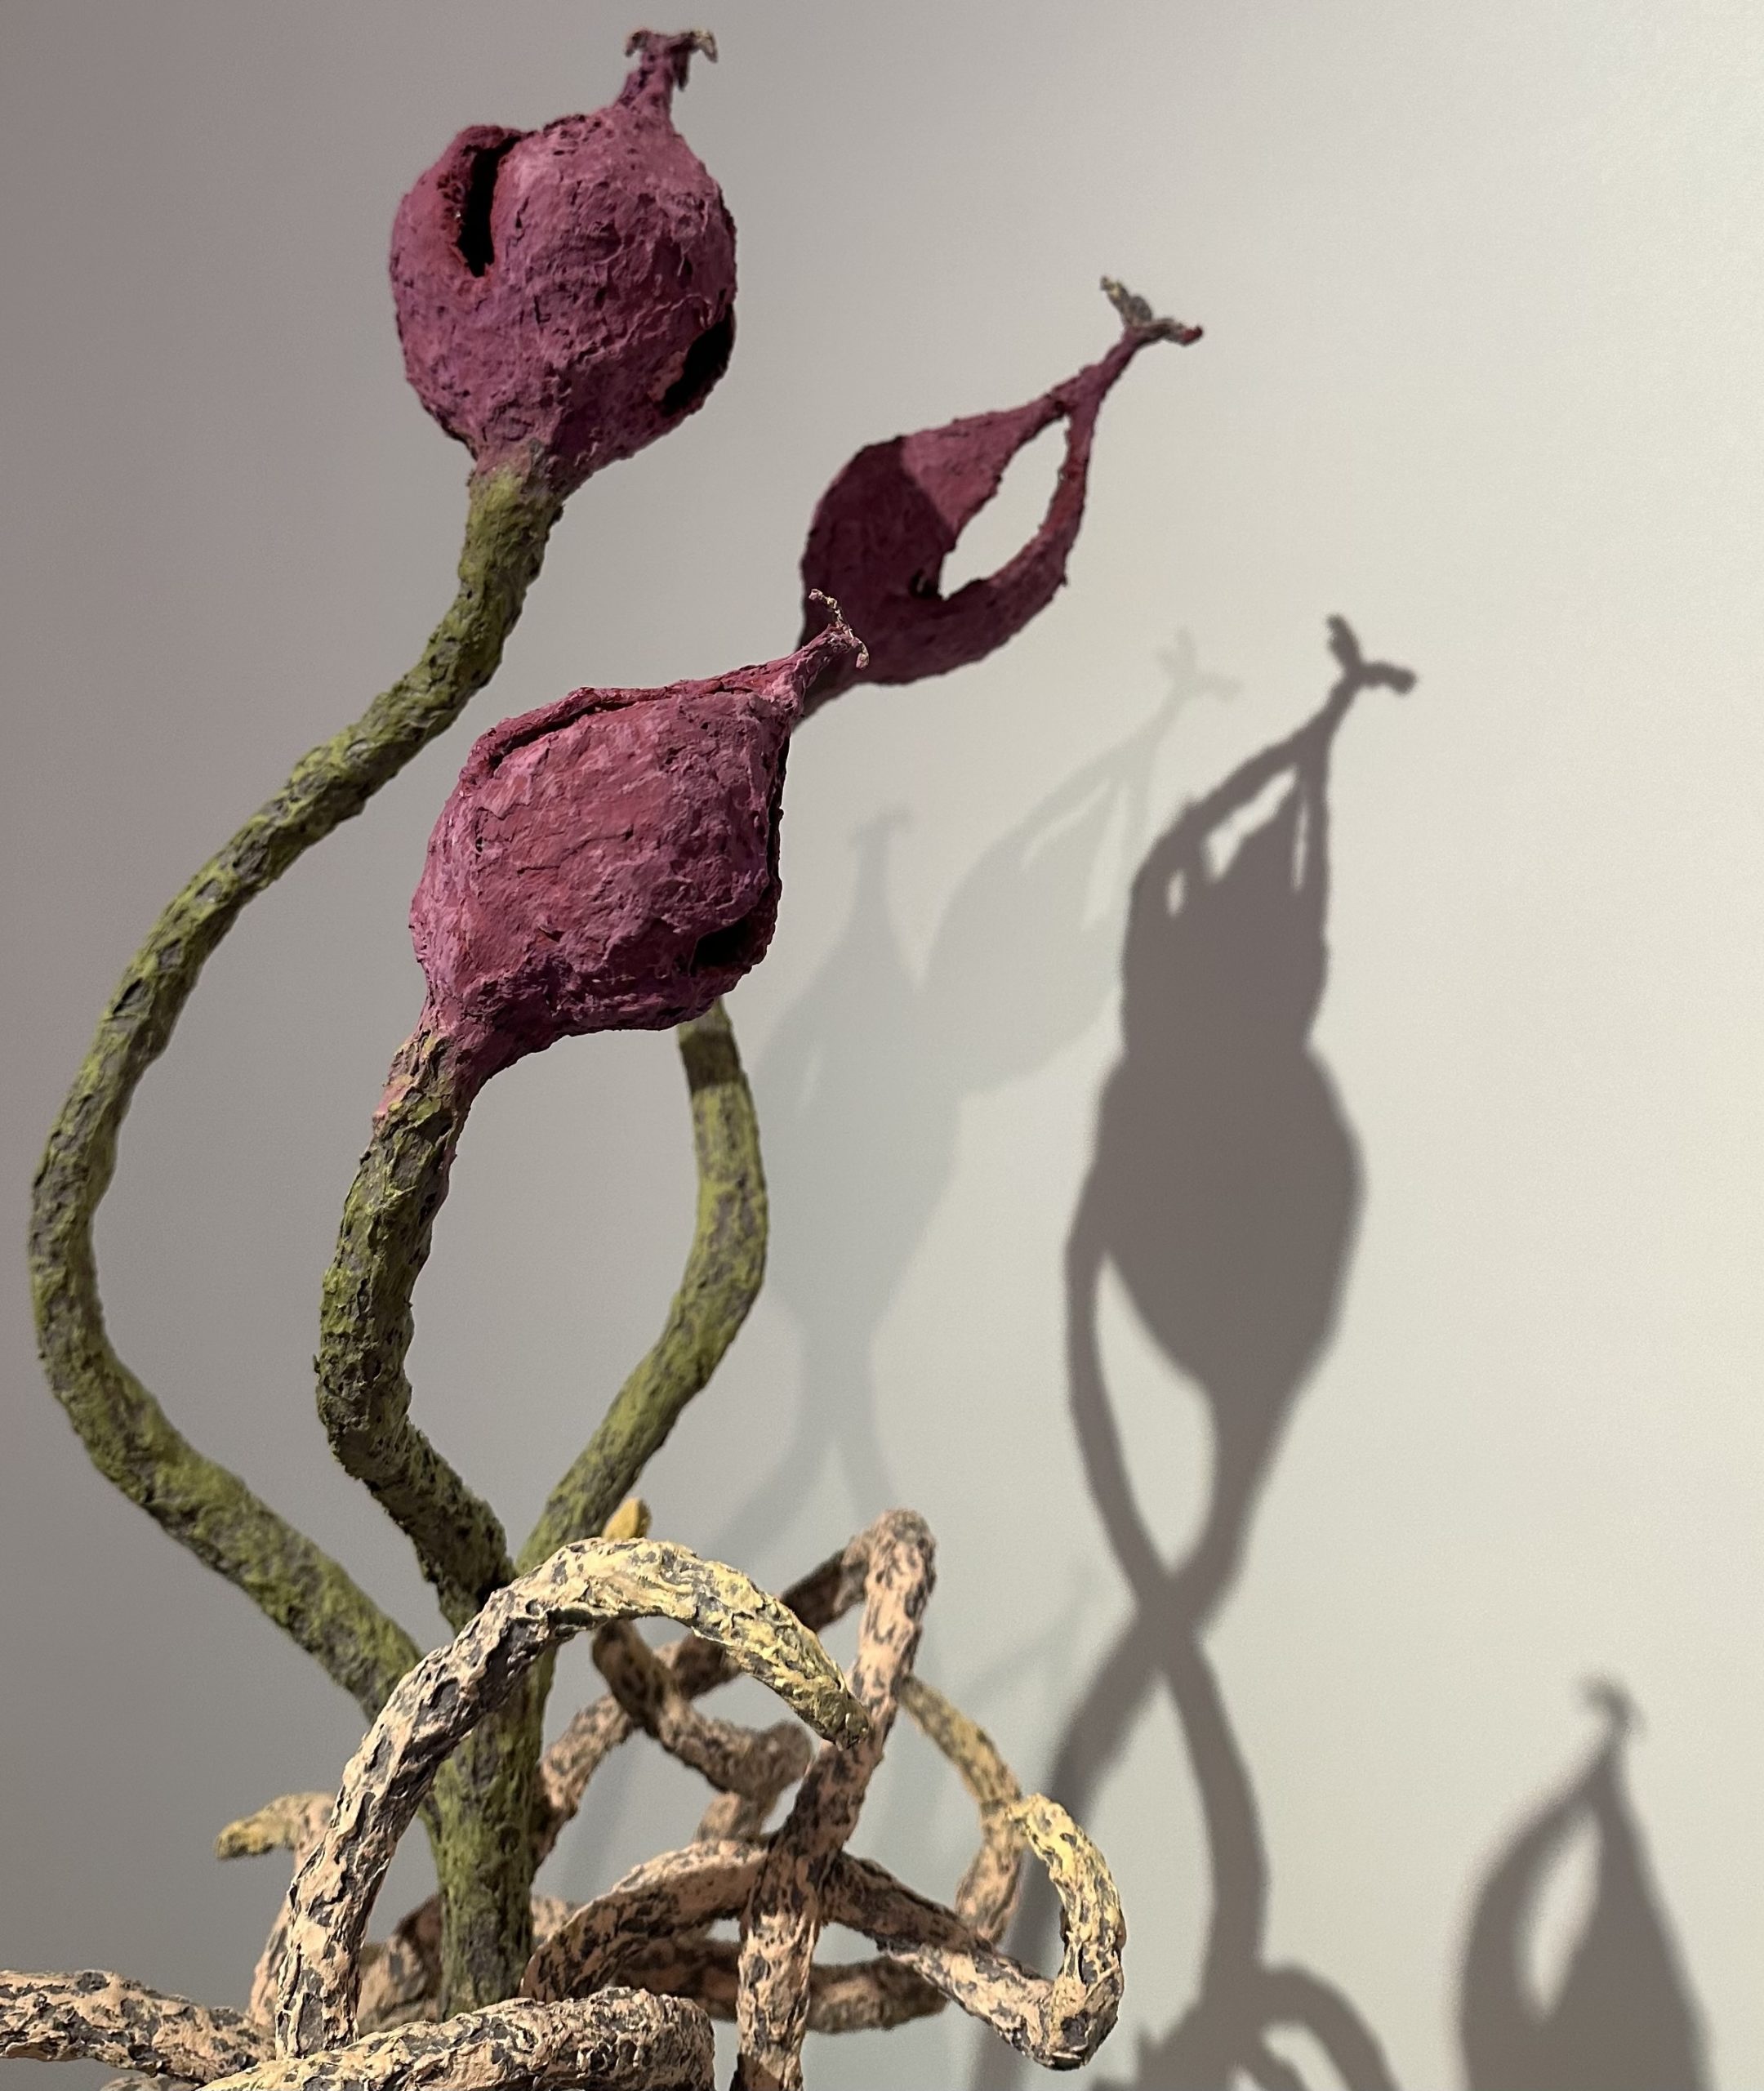 Close-up photo of Mackenzie Sheehan-D'Arrigo's sculpture of a budding plant walking on its roots.